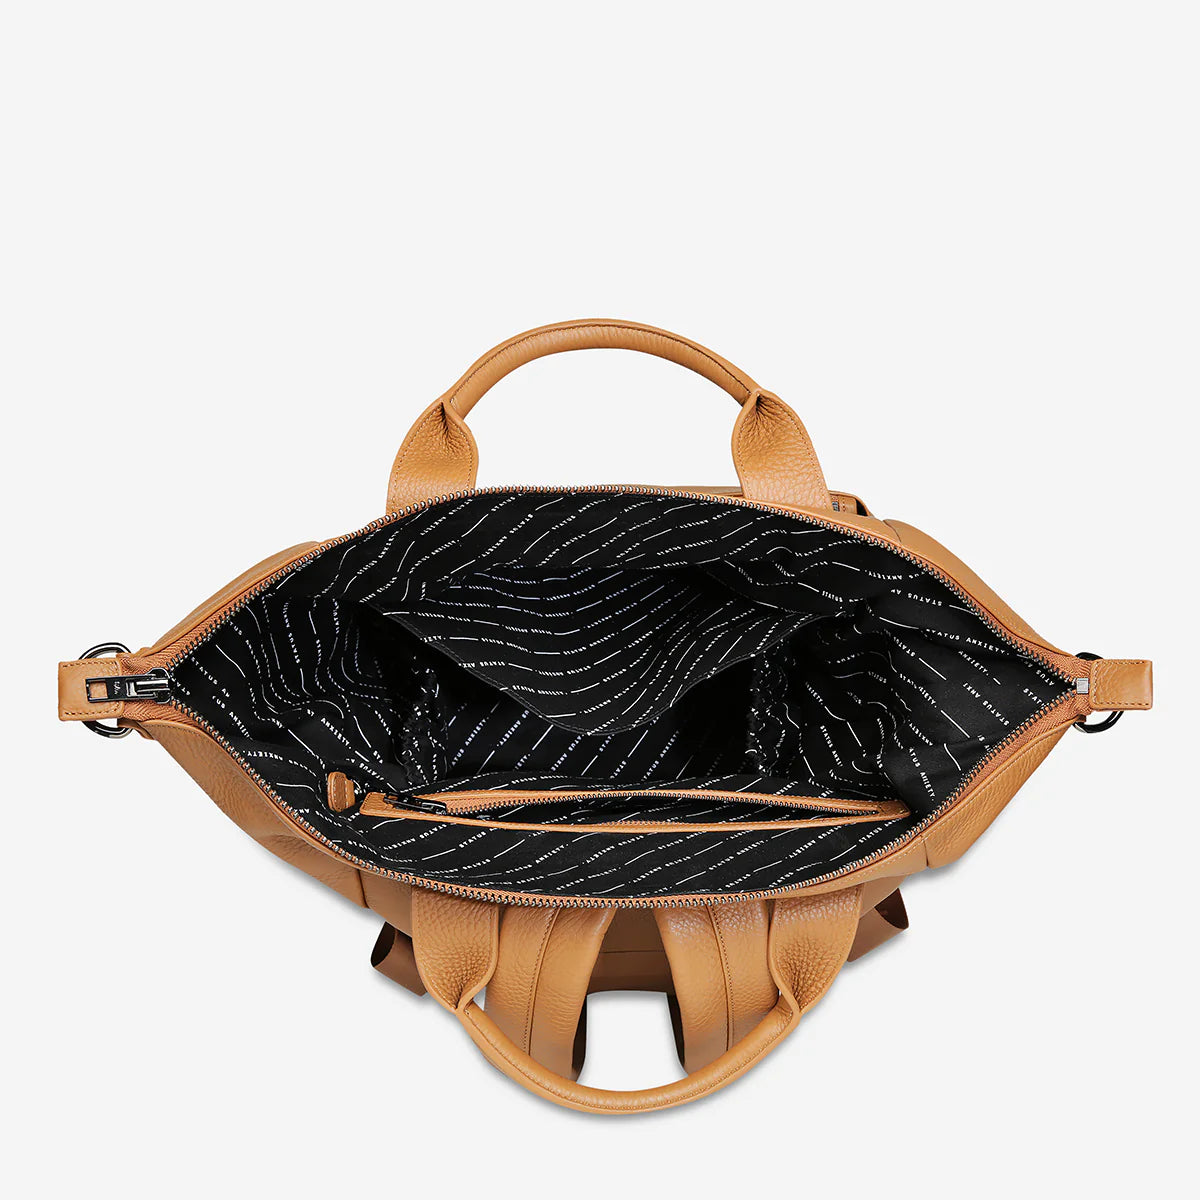 Comes in Waves bag